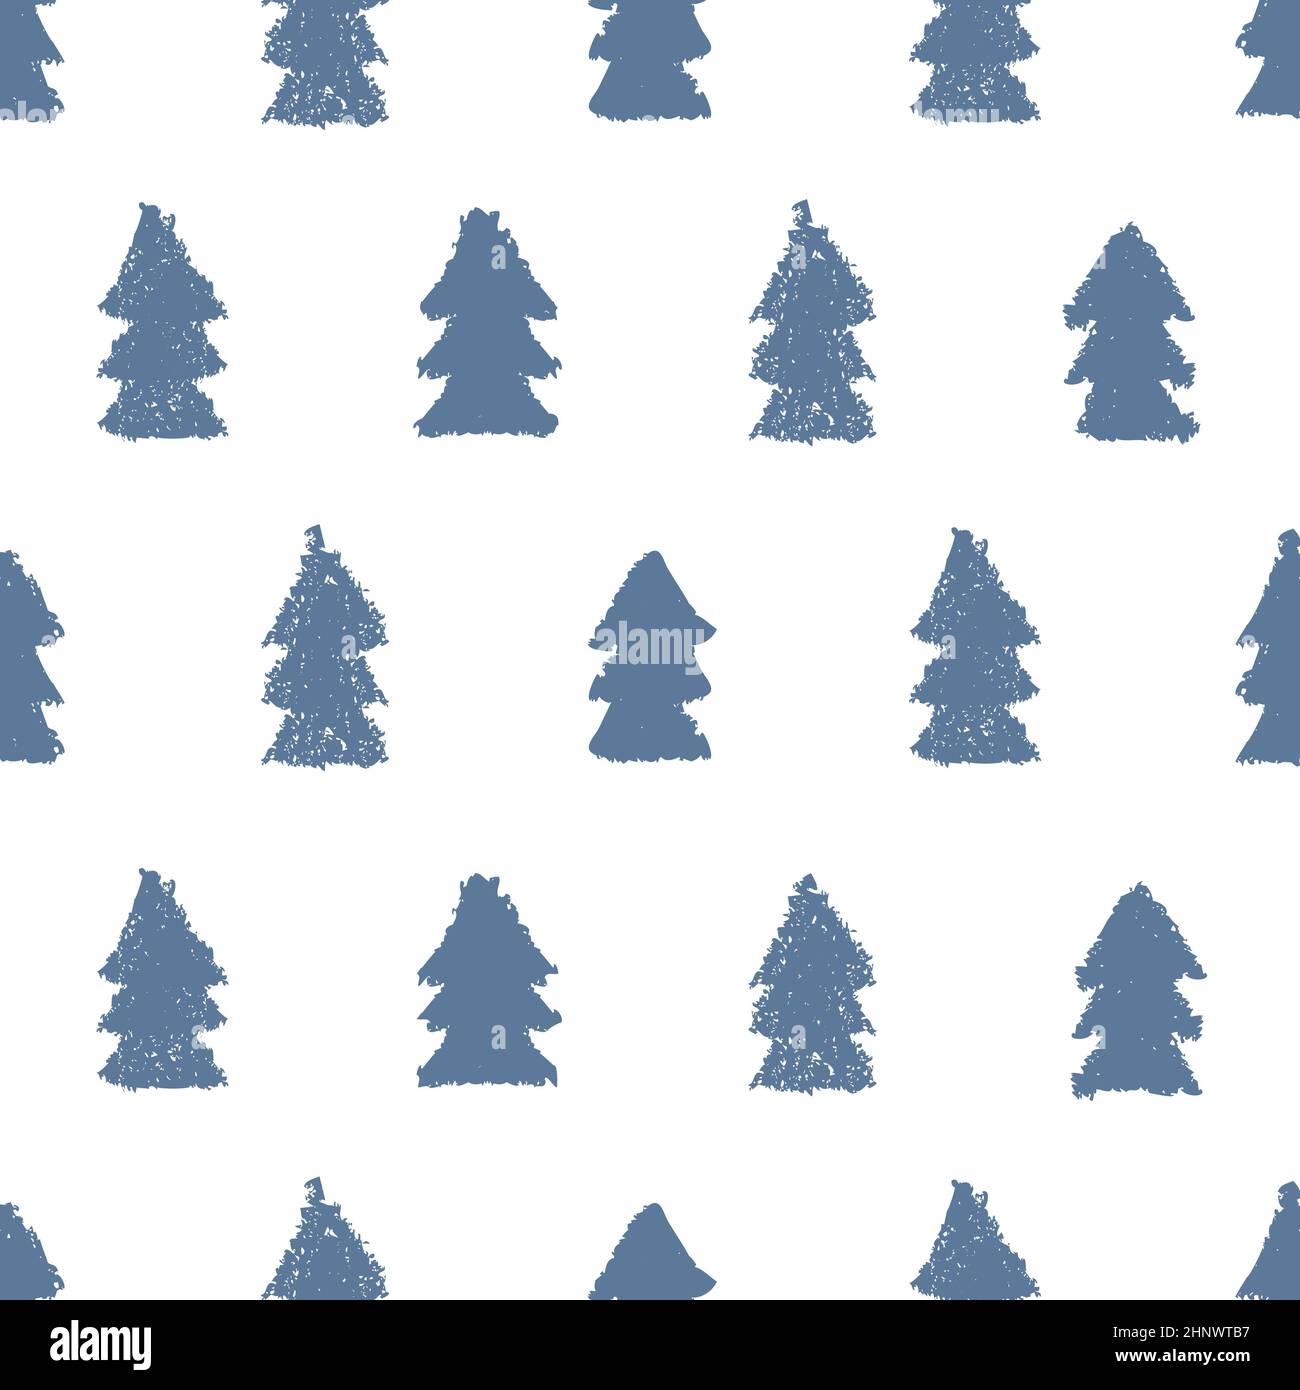 https://c8.alamy.com/comp/2HNWTB7/christmas-trees-seamless-pattern-hand-painted-pastel-crayon-grunge-background-design-element-for-xmas-wallpapers-invitations-scrapbooking-fabric-2HNWTB7.jpg